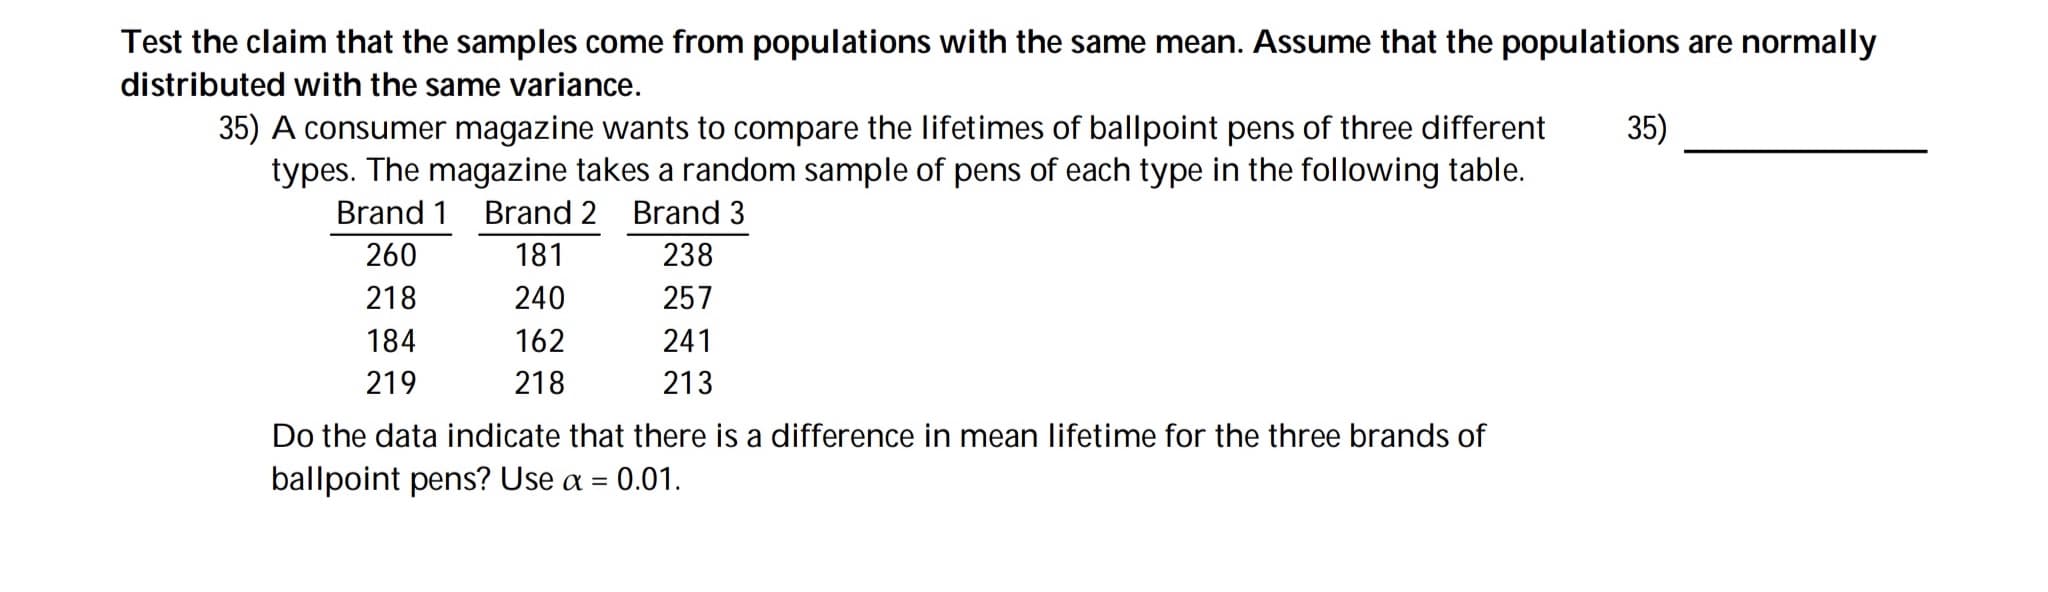 Test the claim that the samples come from populations with the same mean. Assume that the populations are normally
distributed with the same variance.
35) A consumer magazine wants to compare the lifetimes of ballpoint pens of three different
types. The magazine takes a random sample of pens of each type in the following table.
35)
Brand 1 Brand 2 Brand 3
260
181
238
218
240
257
184
162
241
219
218
213
Do the data indicate that there is a difference in mean lifetime for the three brands of
ballpoint pens? Use a
0.01.
